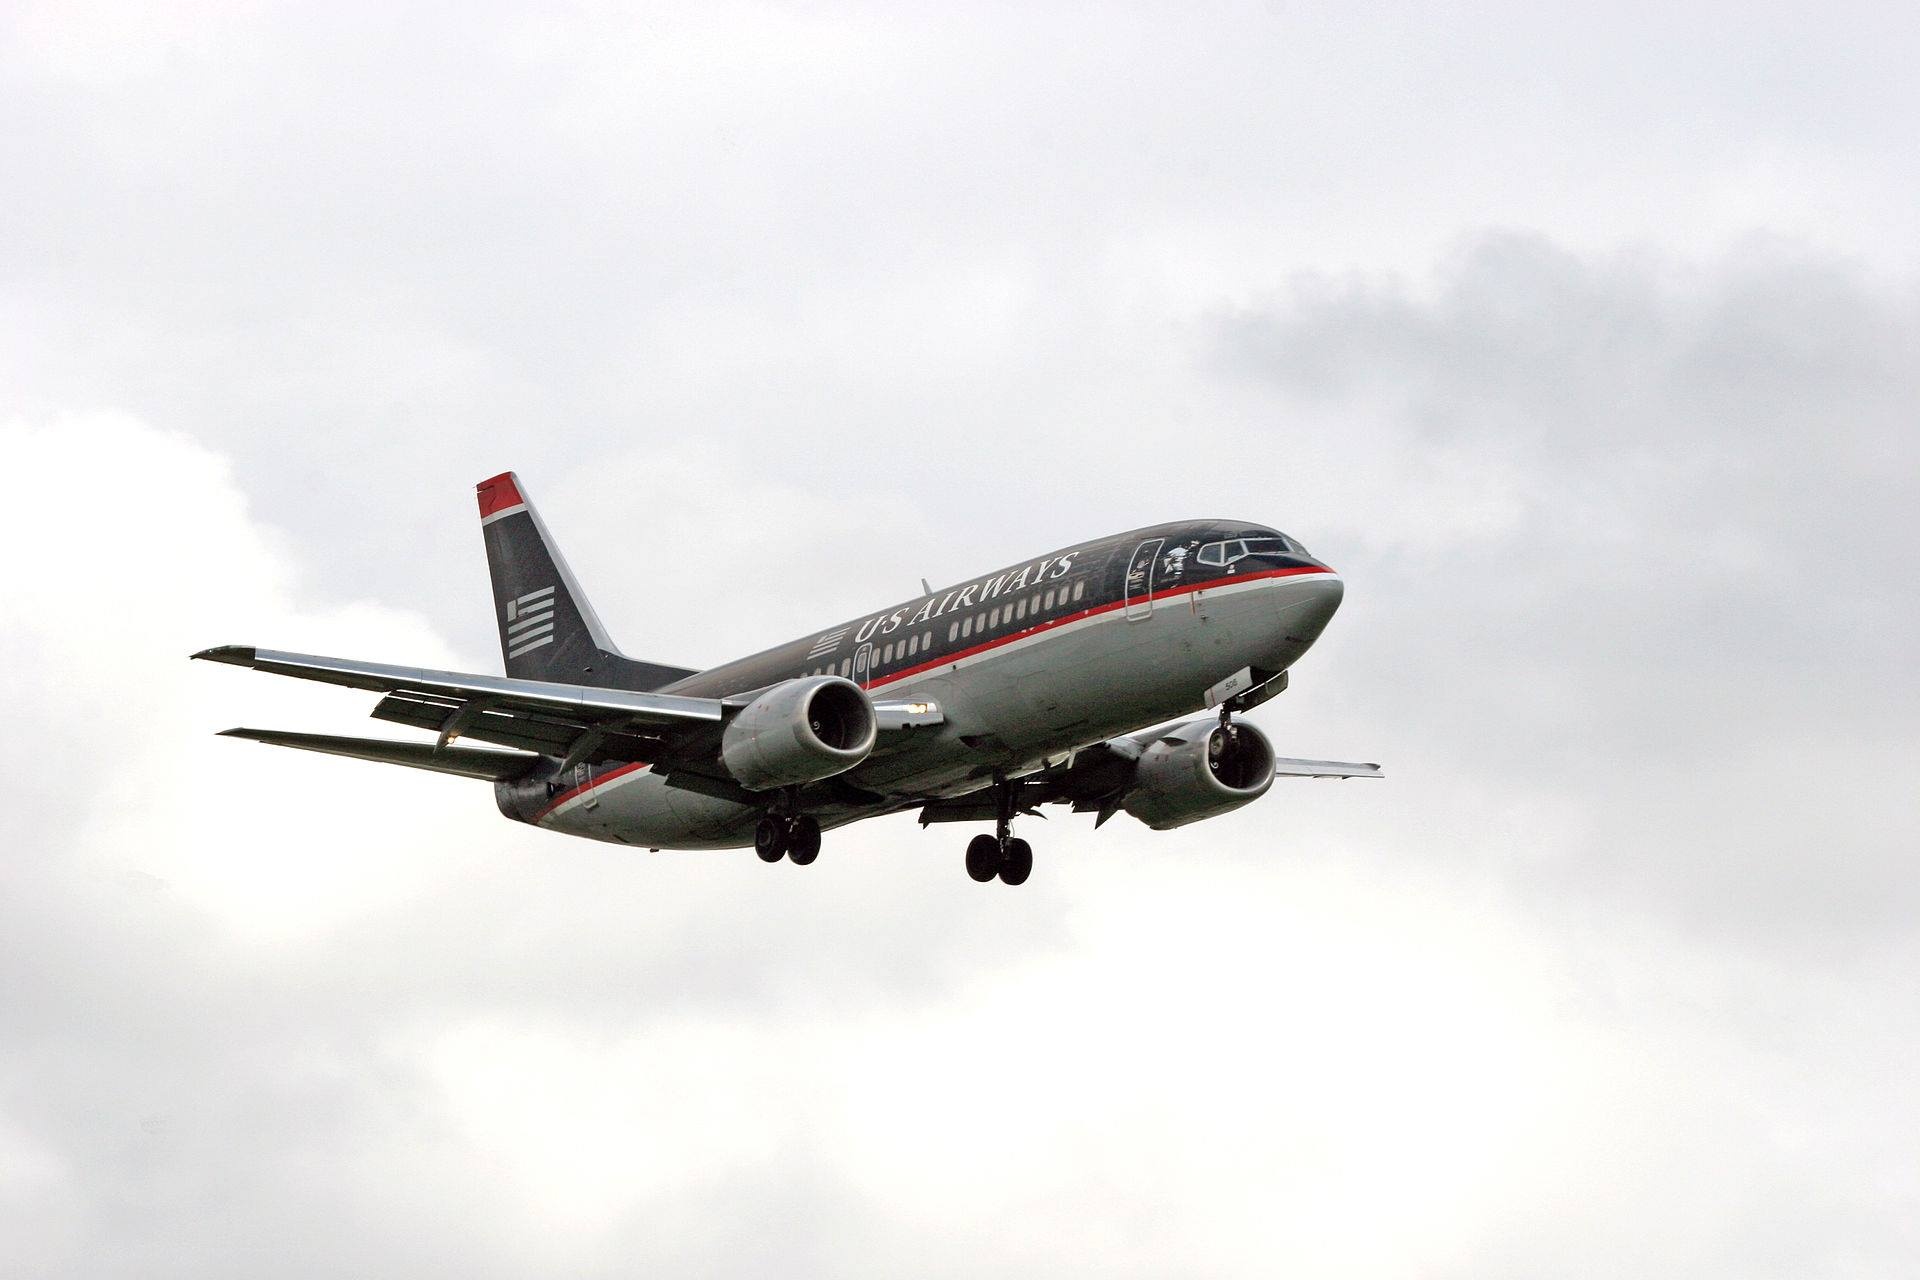 US Airways, Airlines bankruptcy, Industry repercussions, Business downturn, 1920x1280 HD Desktop